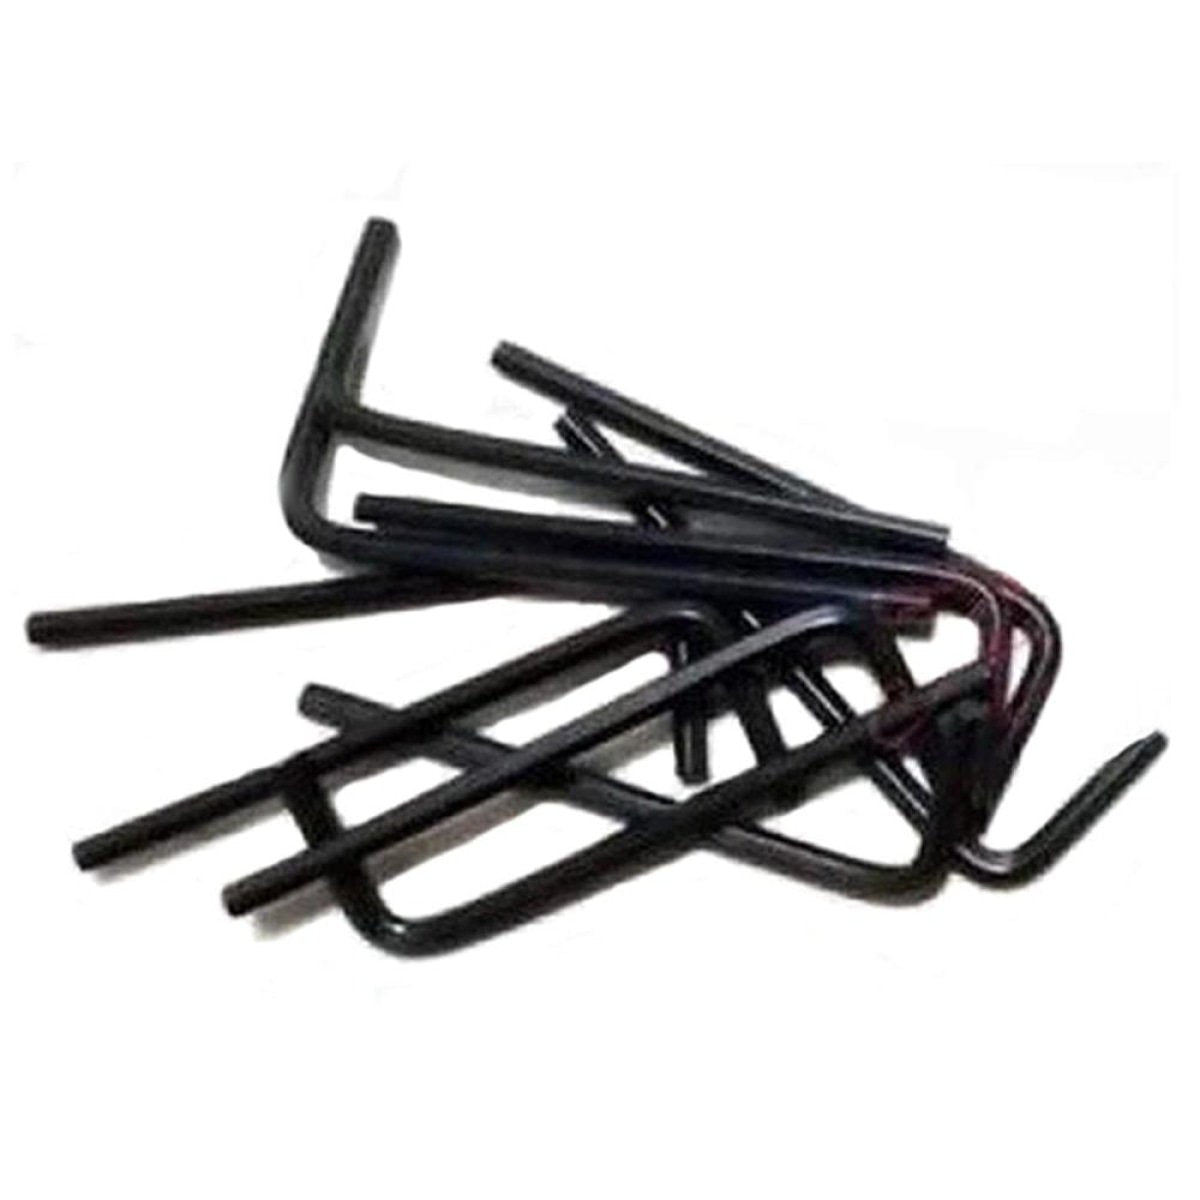 1.5mm 2mm 2.5mm 3mm 4mm 5mm Hex Key Keys Black Steel M1.5 M2 M2.5 M3 M4 M5 Wrench Tool - 2pcs 2.5mm - - Asia Sell